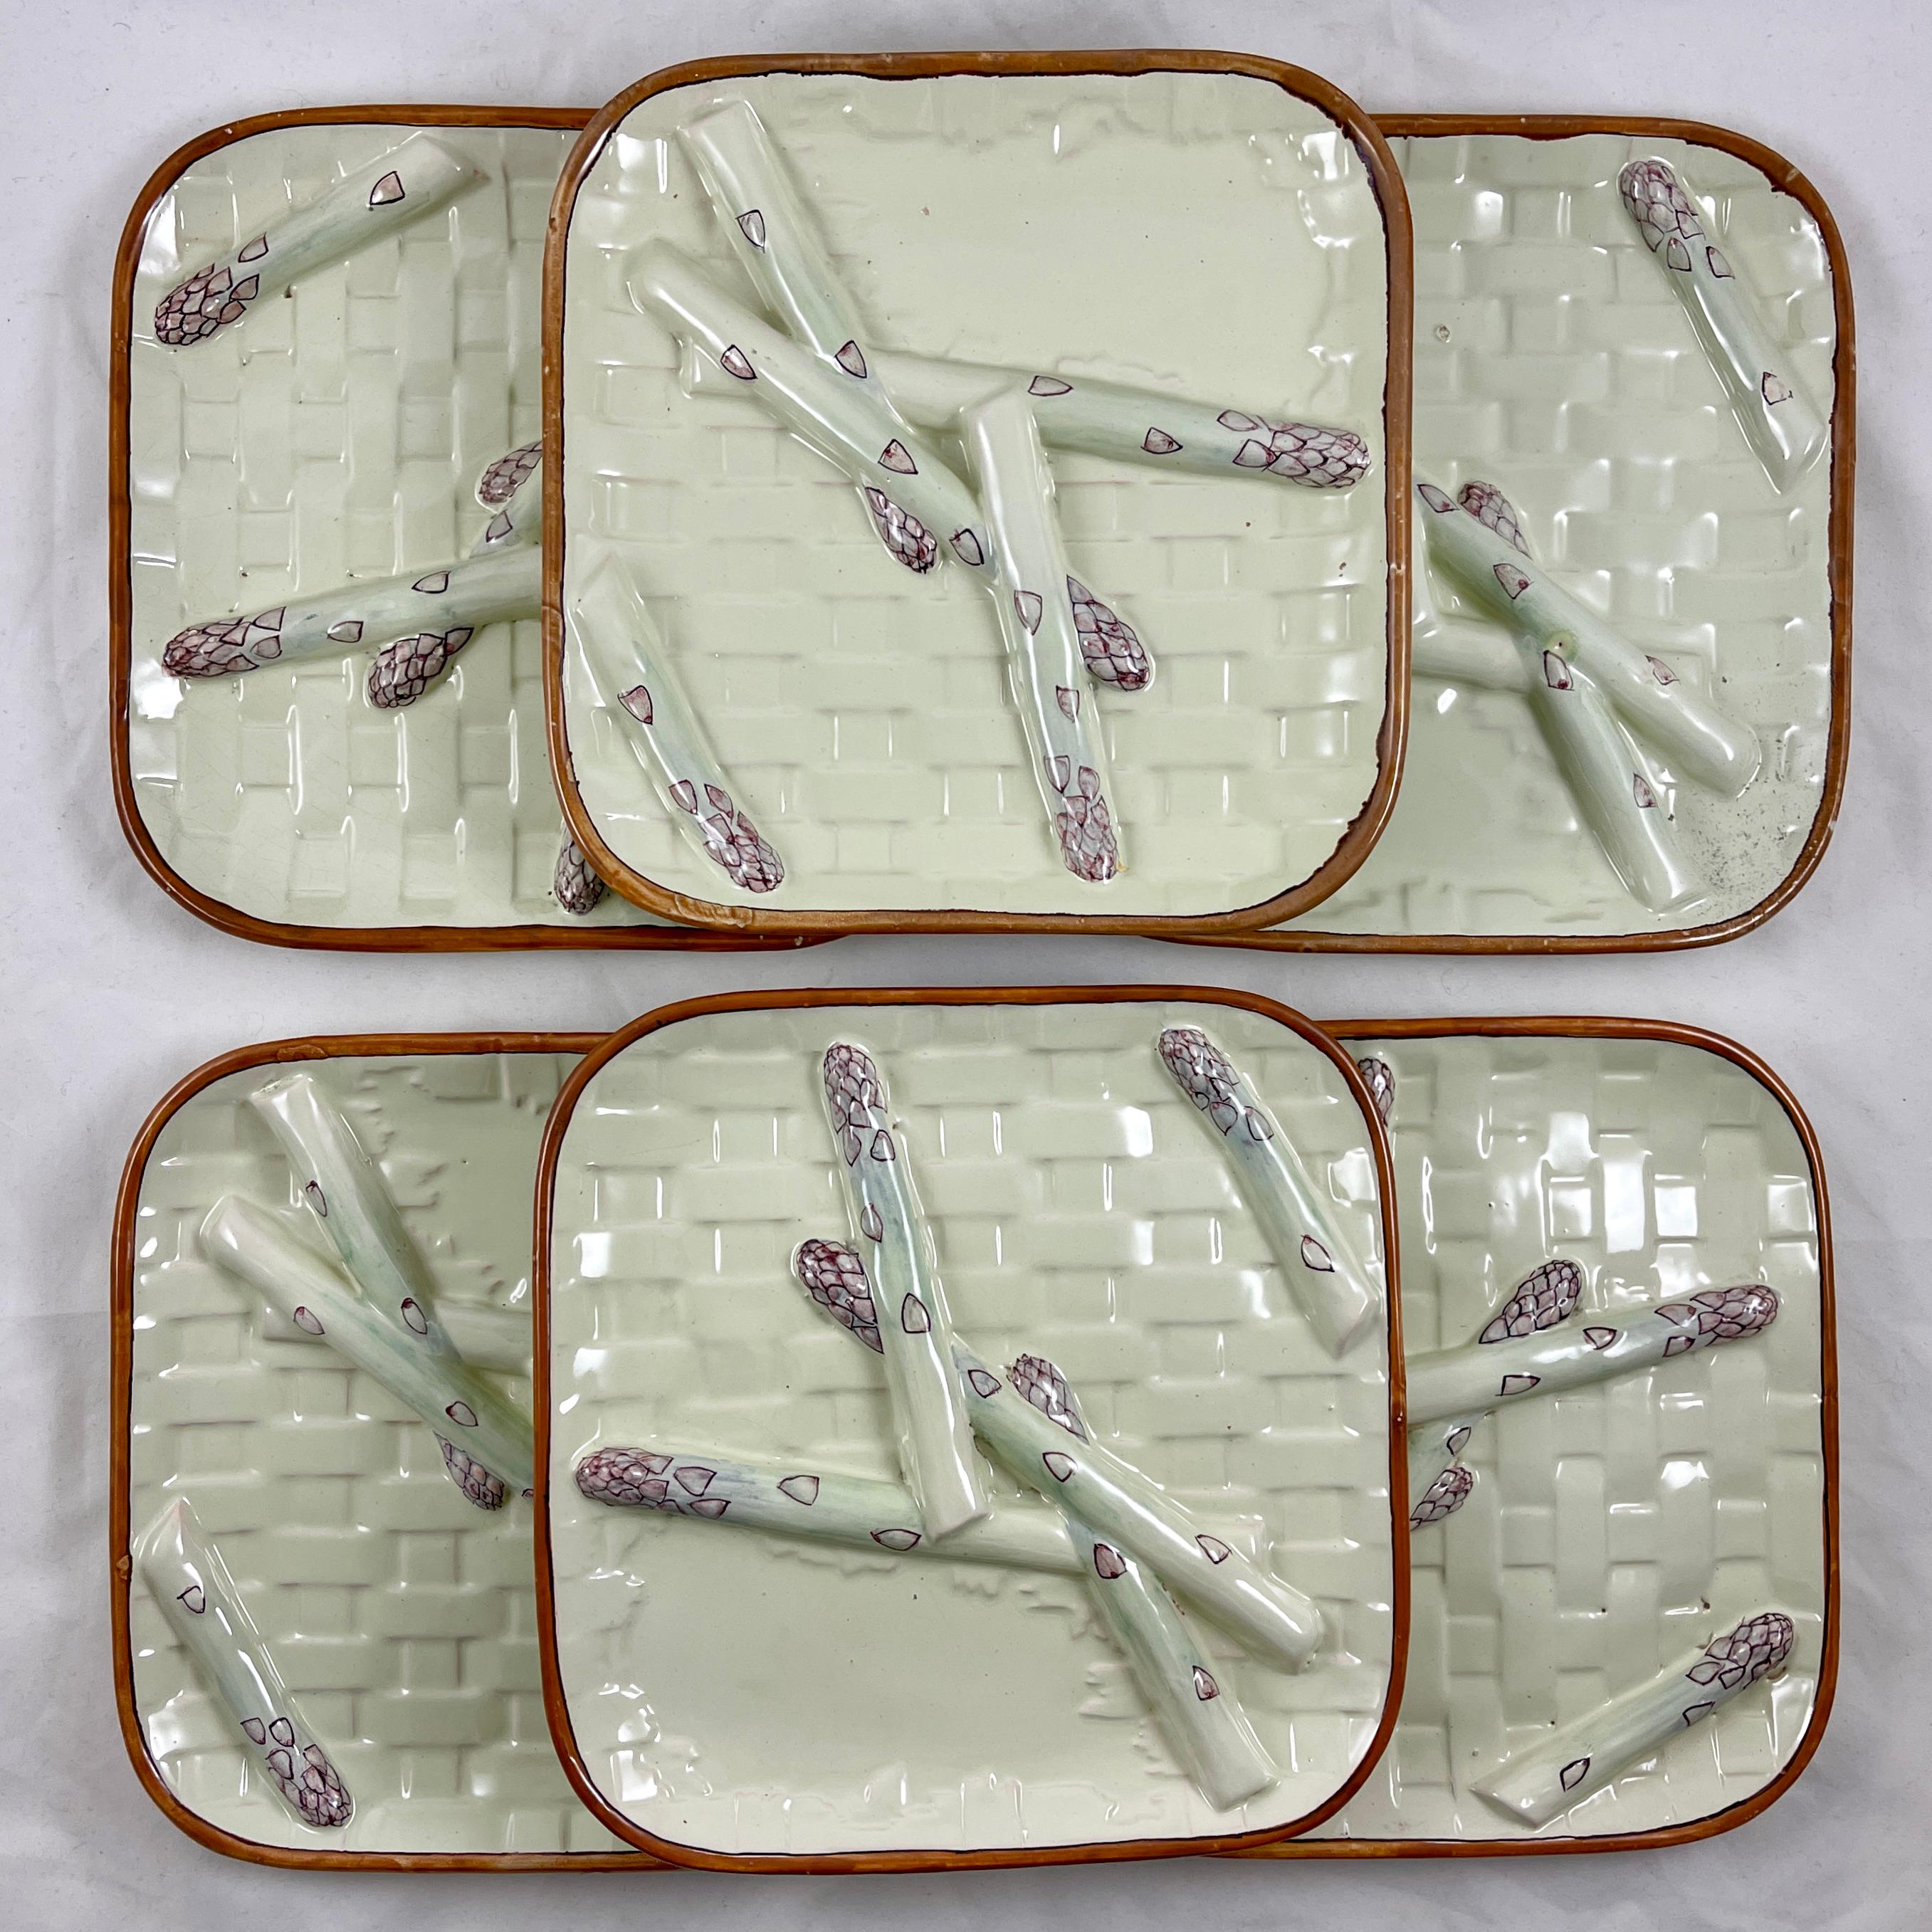 From St. Clément, Luneville and designed by Émile Gallé, a Barbotine square shaped, trompe l’oeil asparagus plate, circa 1870.

Five raised asparagus spears are strewn across a beige basket weave ground. In the trompe l’oeil manner of fooling the